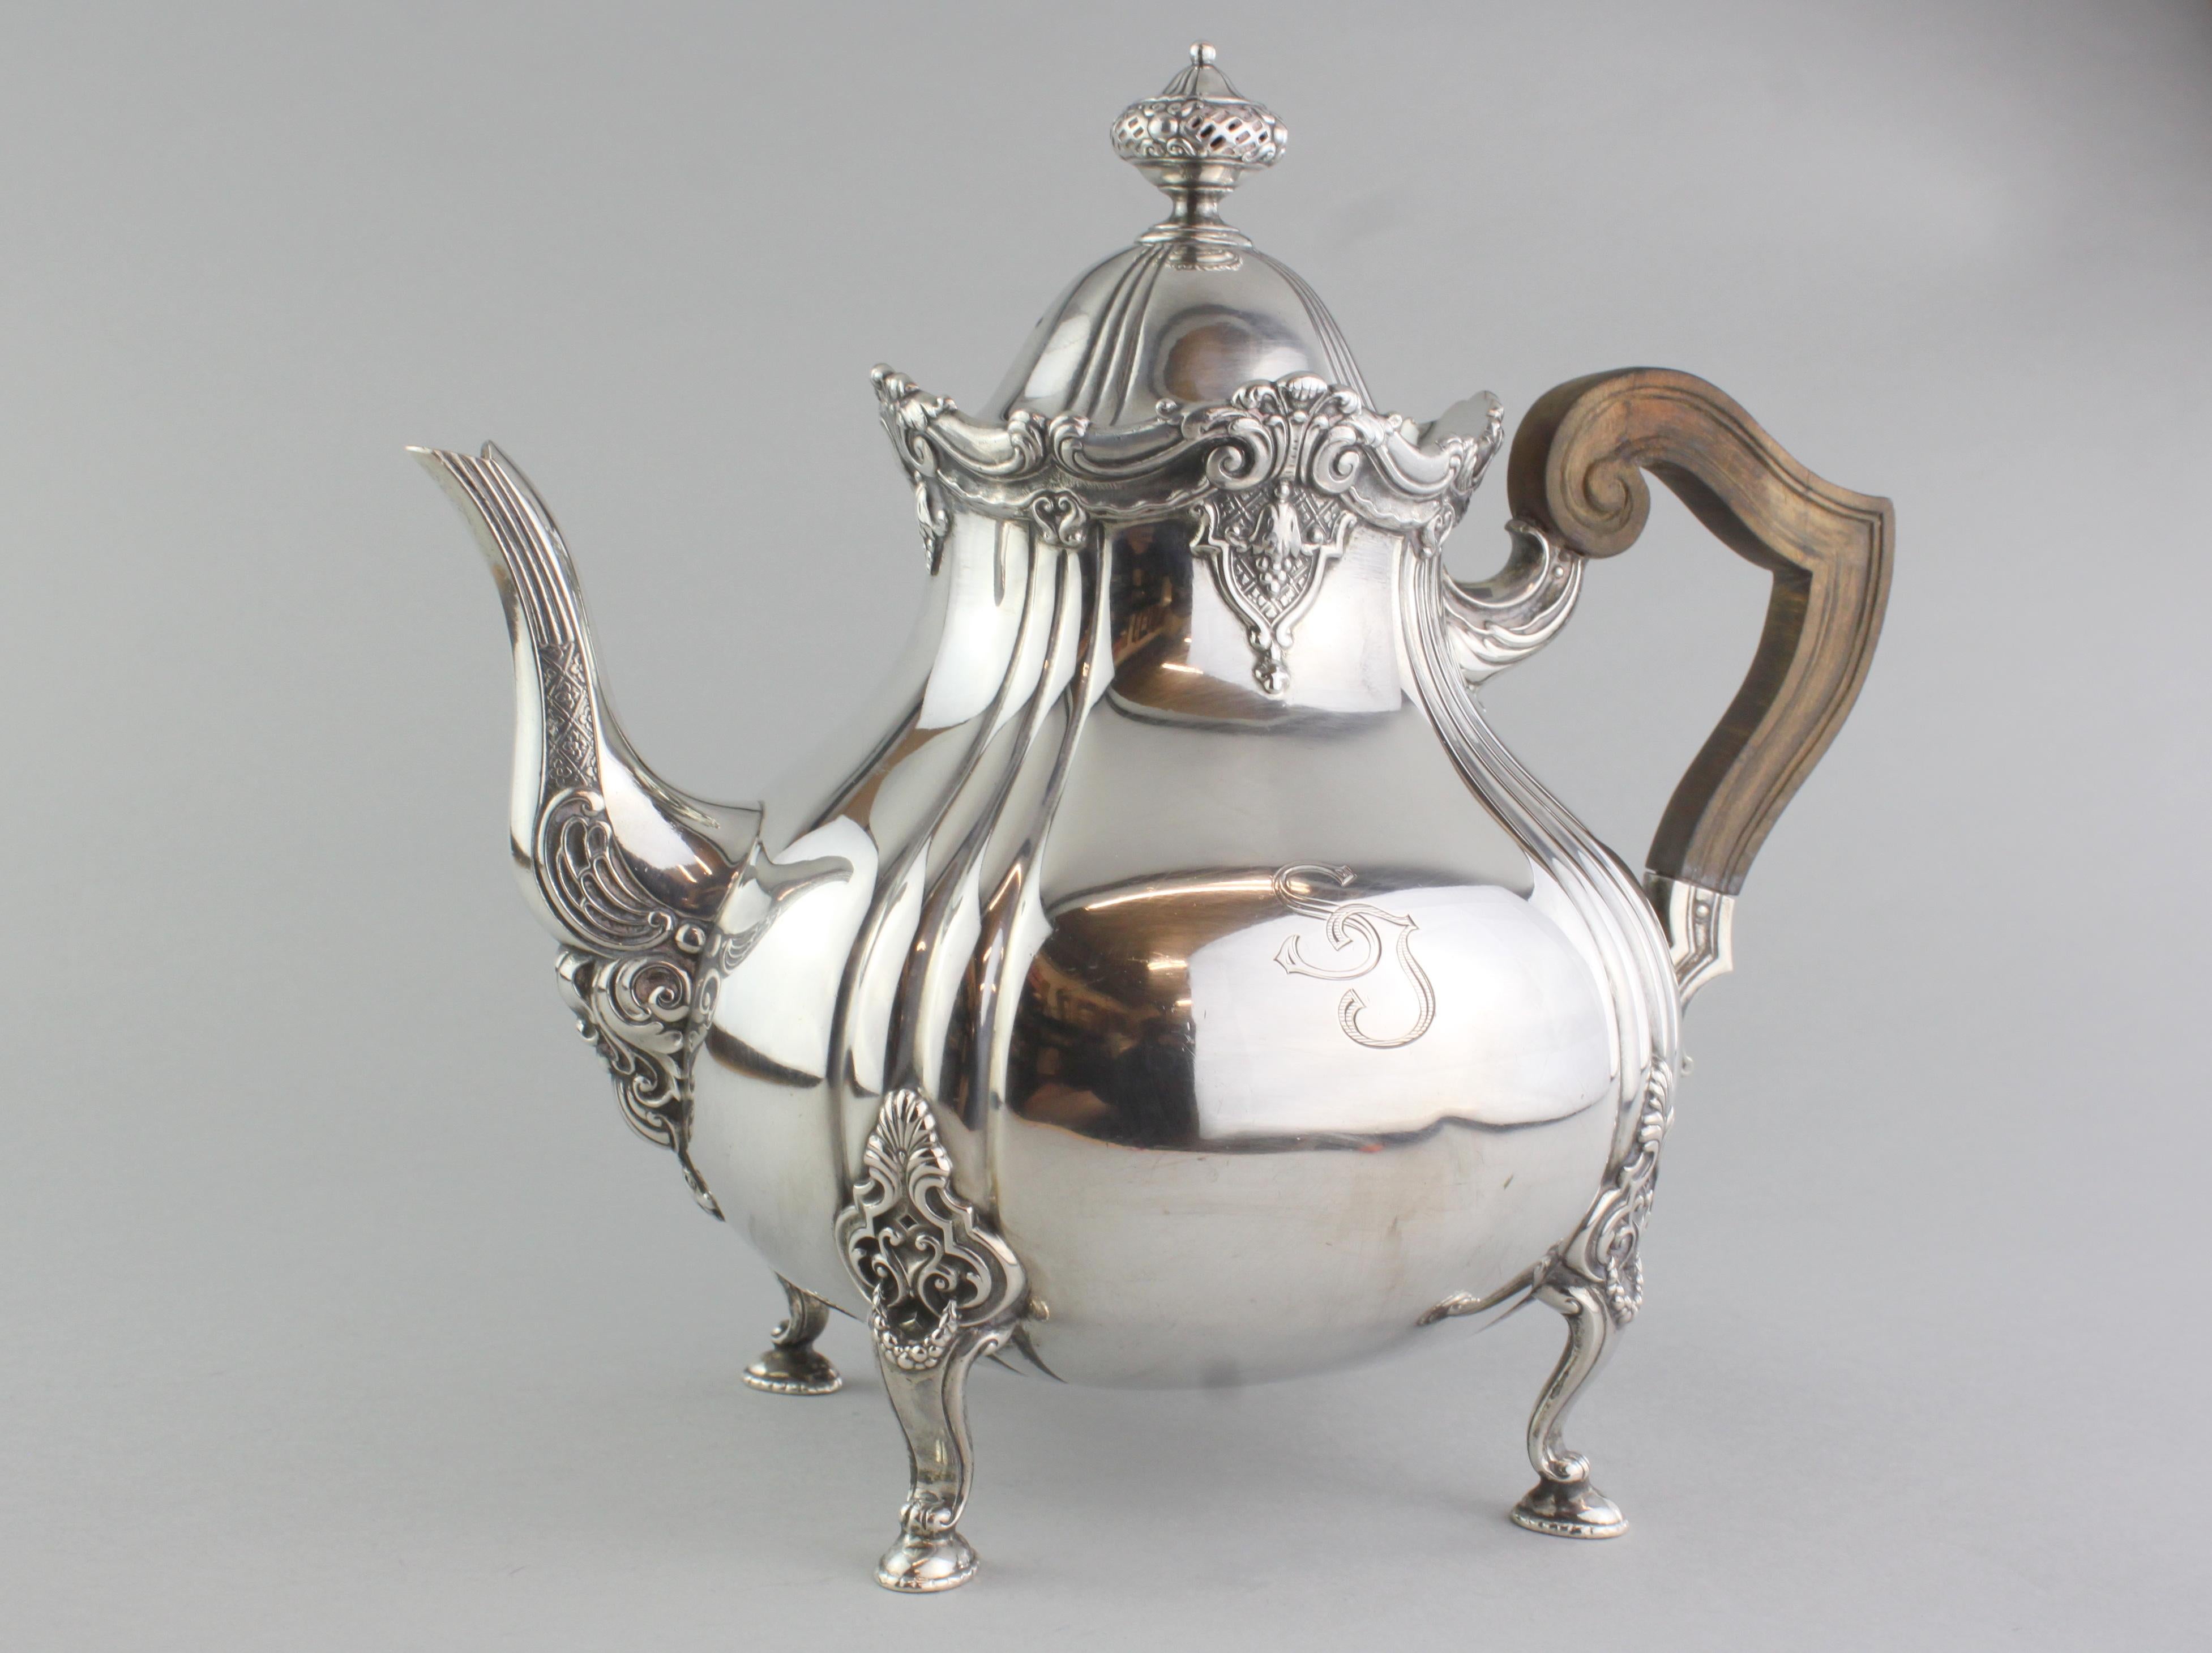 Antique German silver teapot, by Carl Steyl
Maker: Carl Steyl
Made in Germany, circa 1910
Hallmarked 800/1000 silver.

Dimensions:
Size: 25 x 16 x 23 cm
Weight: 910 grams

Condition: Teapot has some surface wear, age related wear and rusted